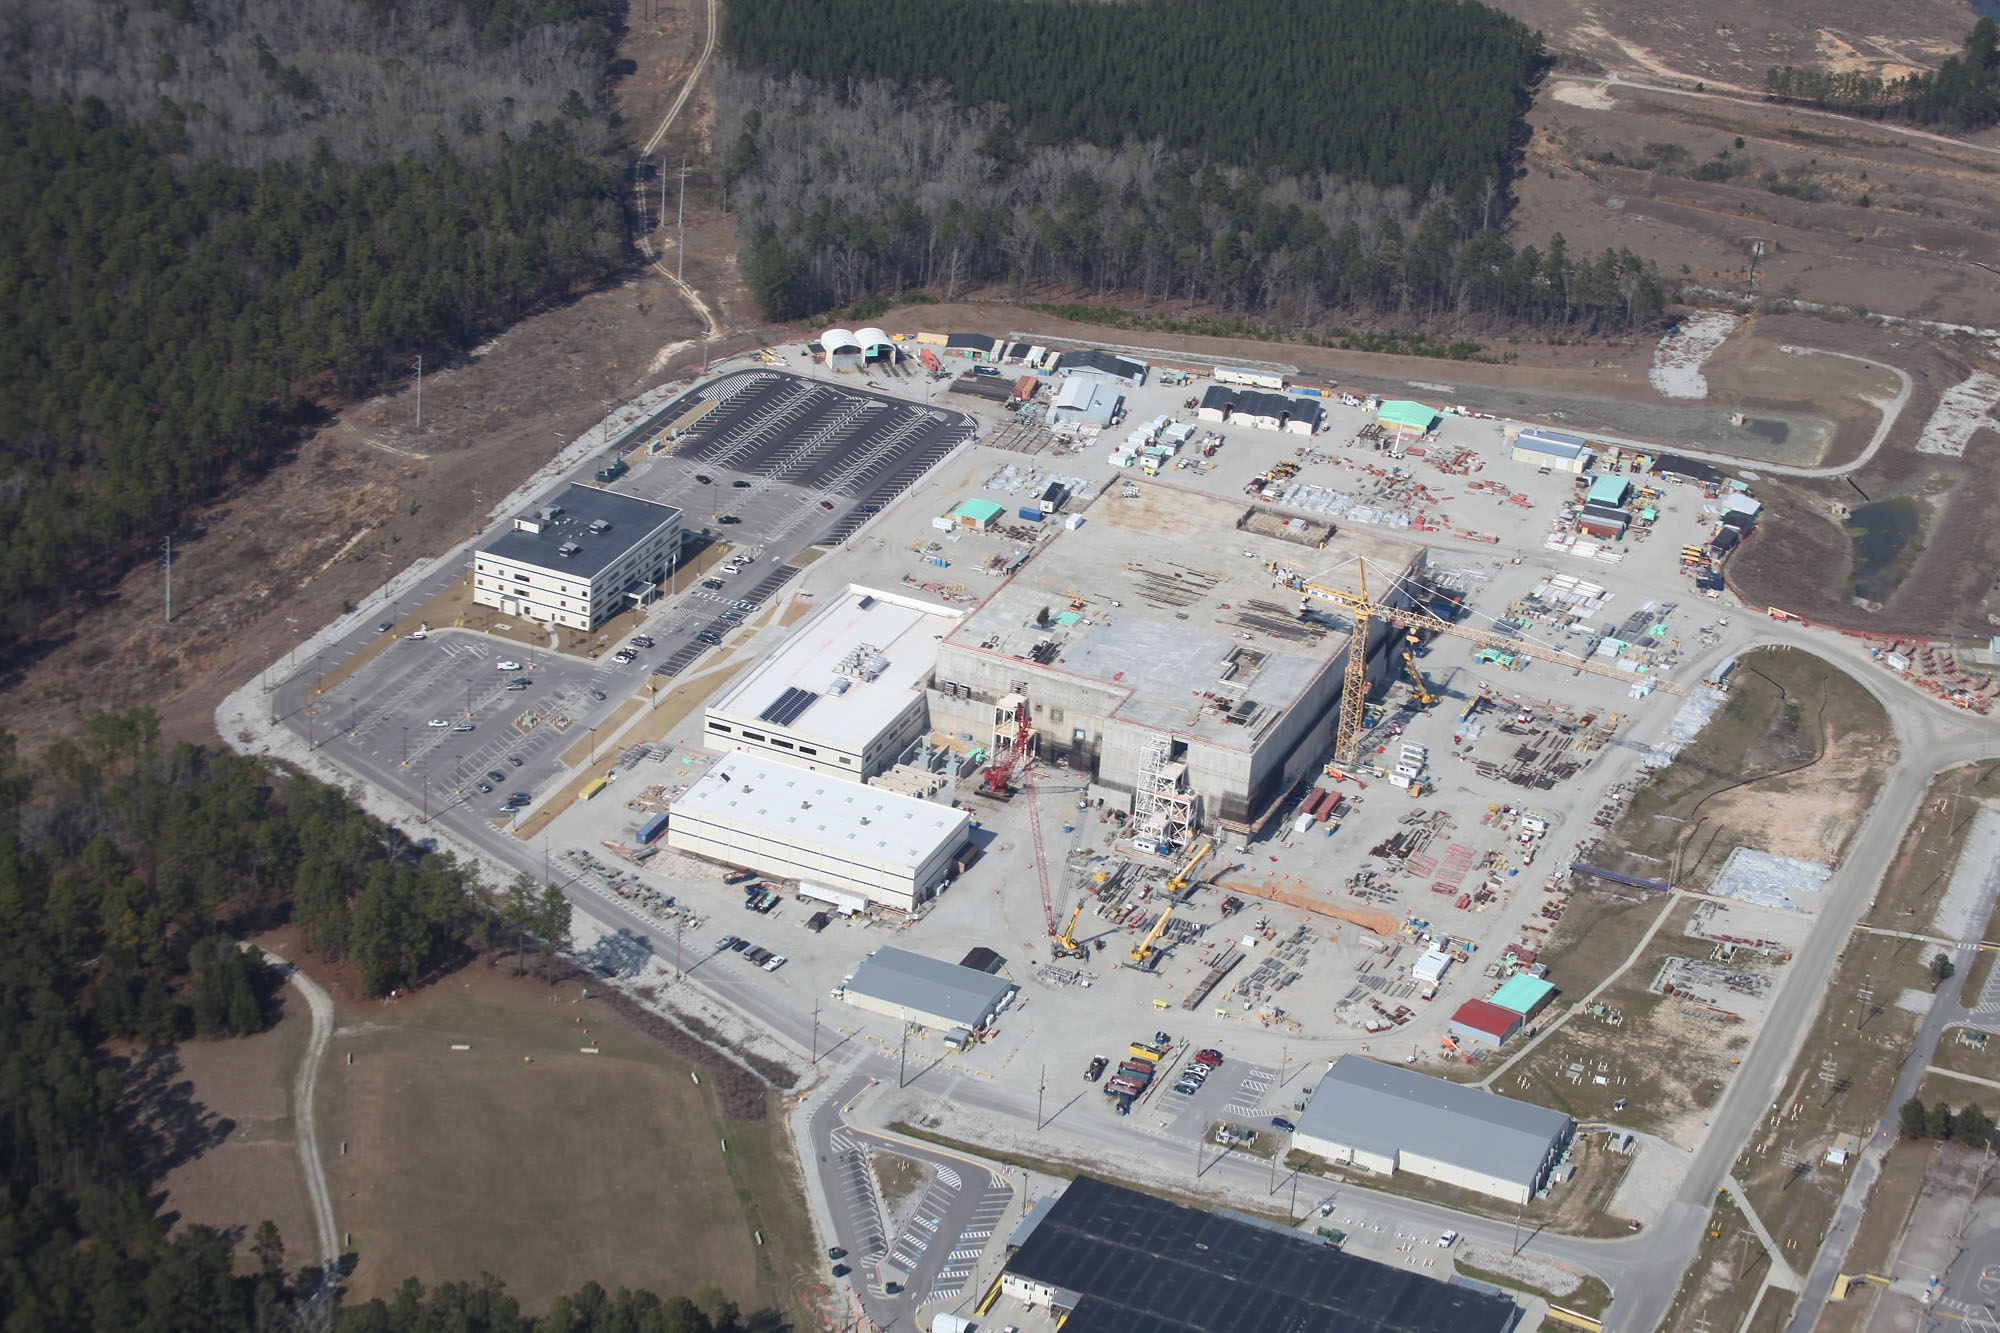 The MOX plutonium fuel factory under construction at the Savannah River Site in South Carolina, 2013.  Photo from Friends of the Earth.